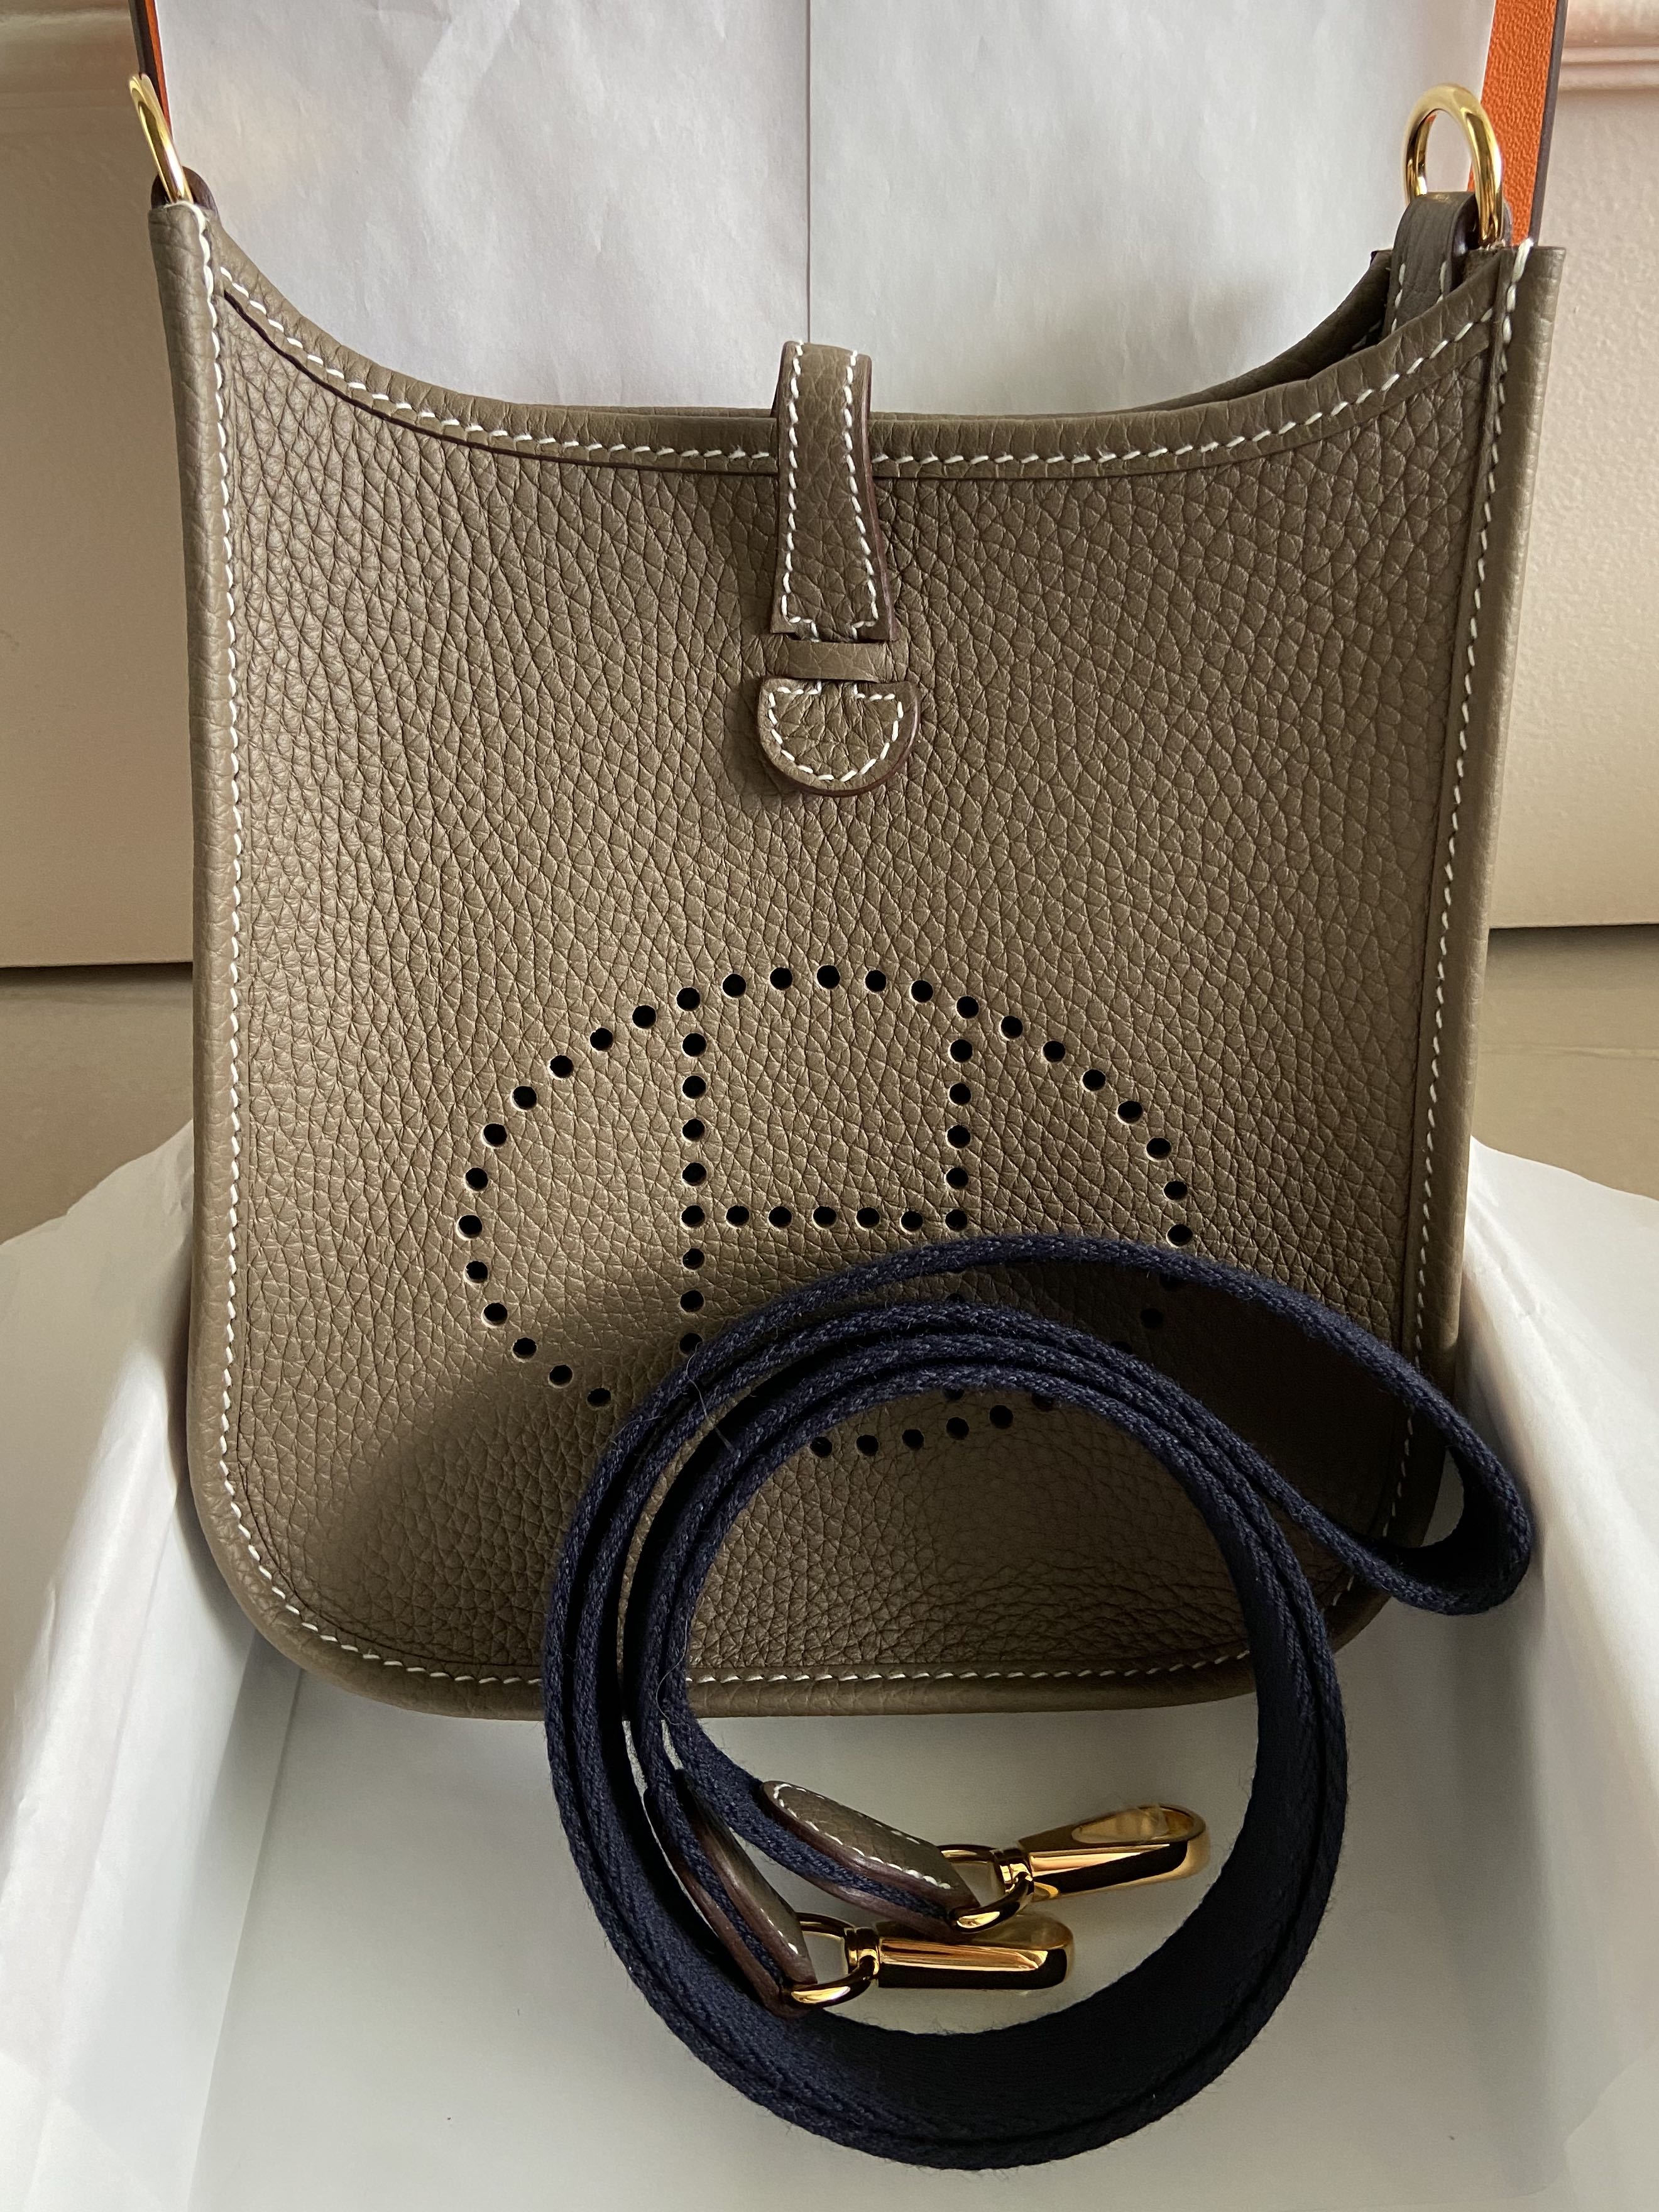 HERMES EVELYN MINI TPM GOLD WITH GOLD HARDWARE AND SPECIAL STRAP! EXTREMELY  RARE